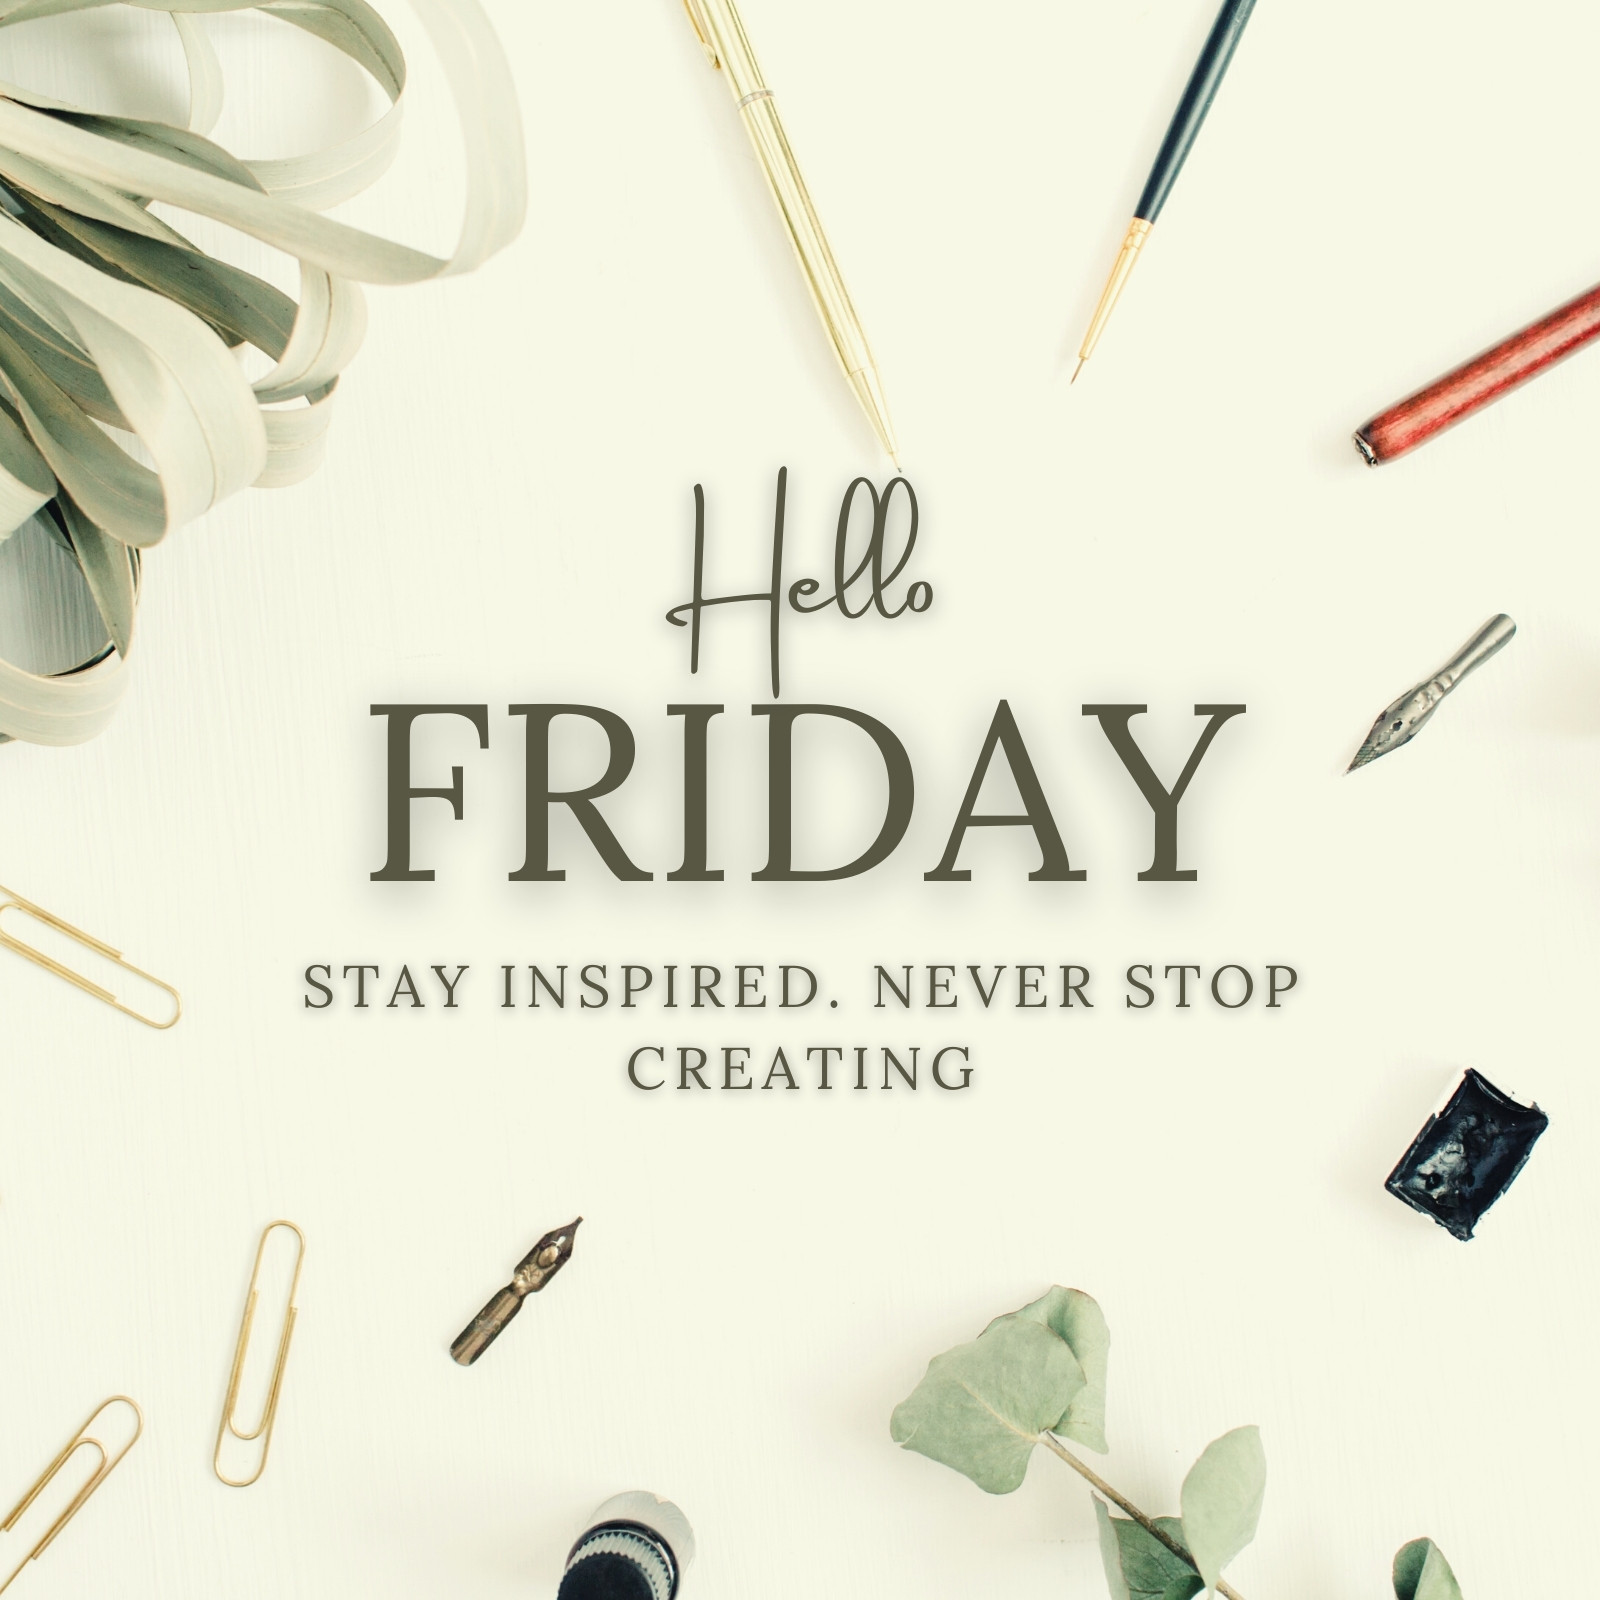 101+ Happy Friday Images and Quotes - Good Morning Friday